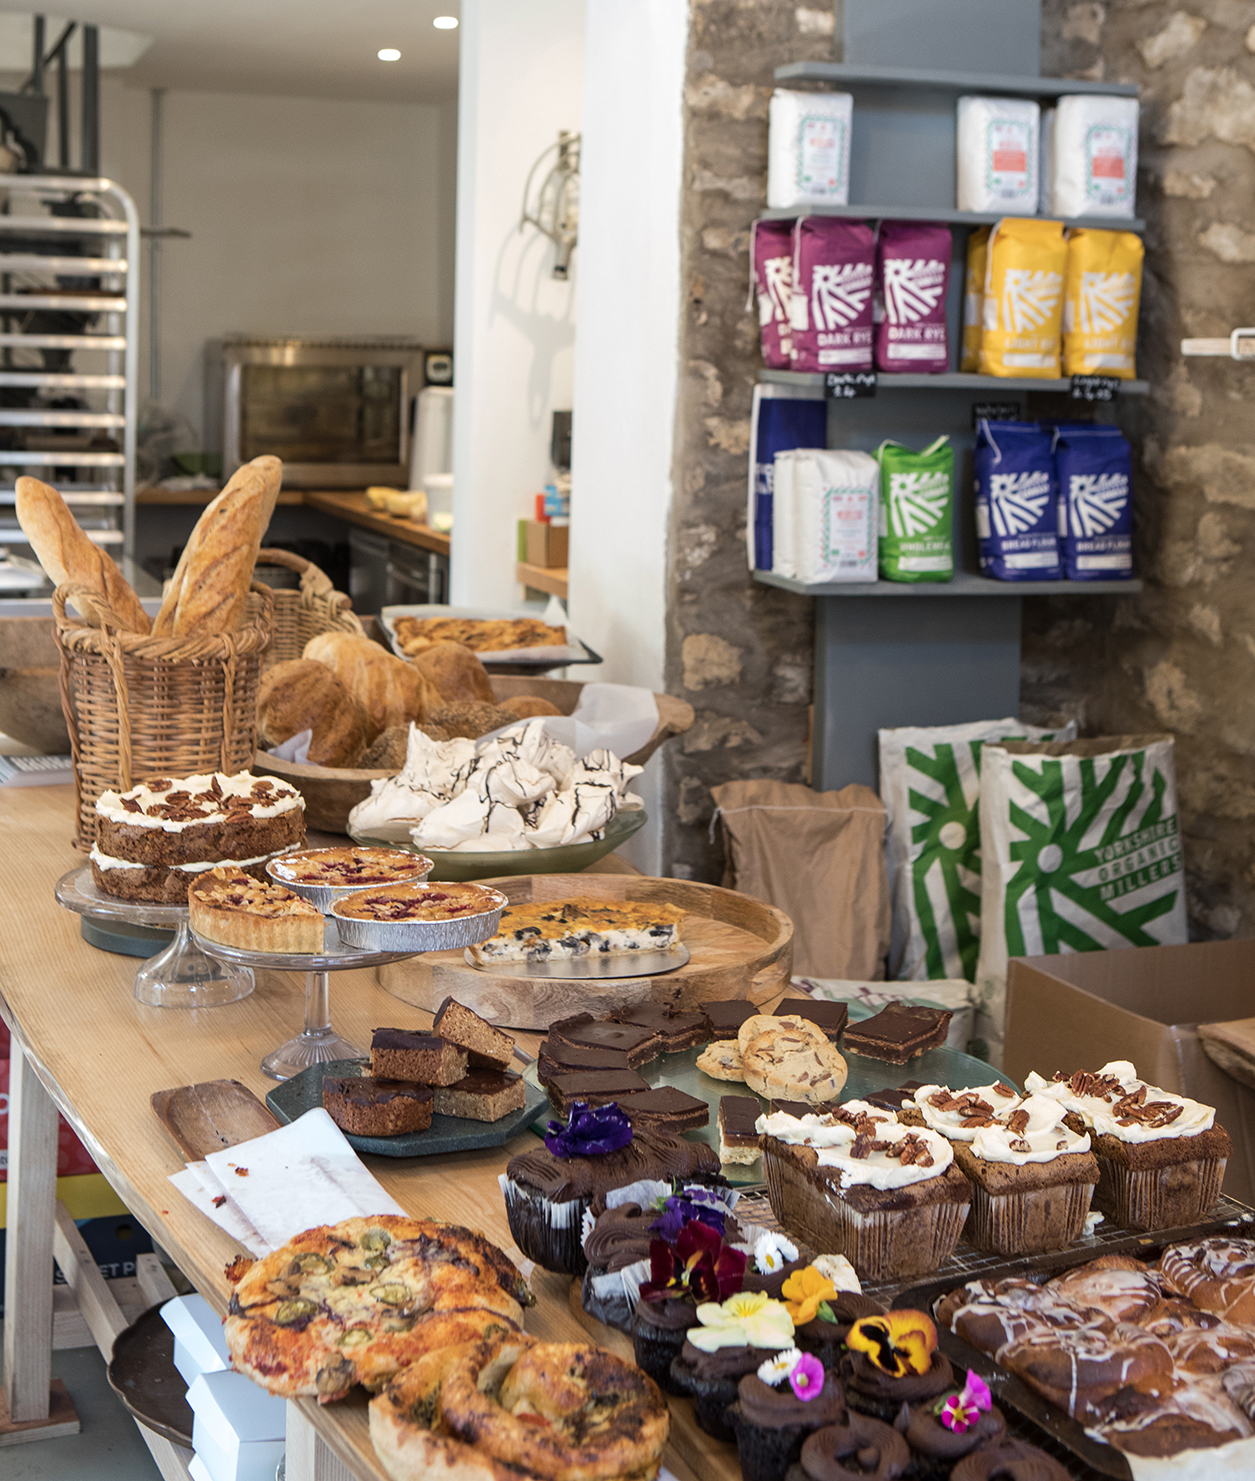 Baked goods on table and flour on shelving behind by Polly Baldwin